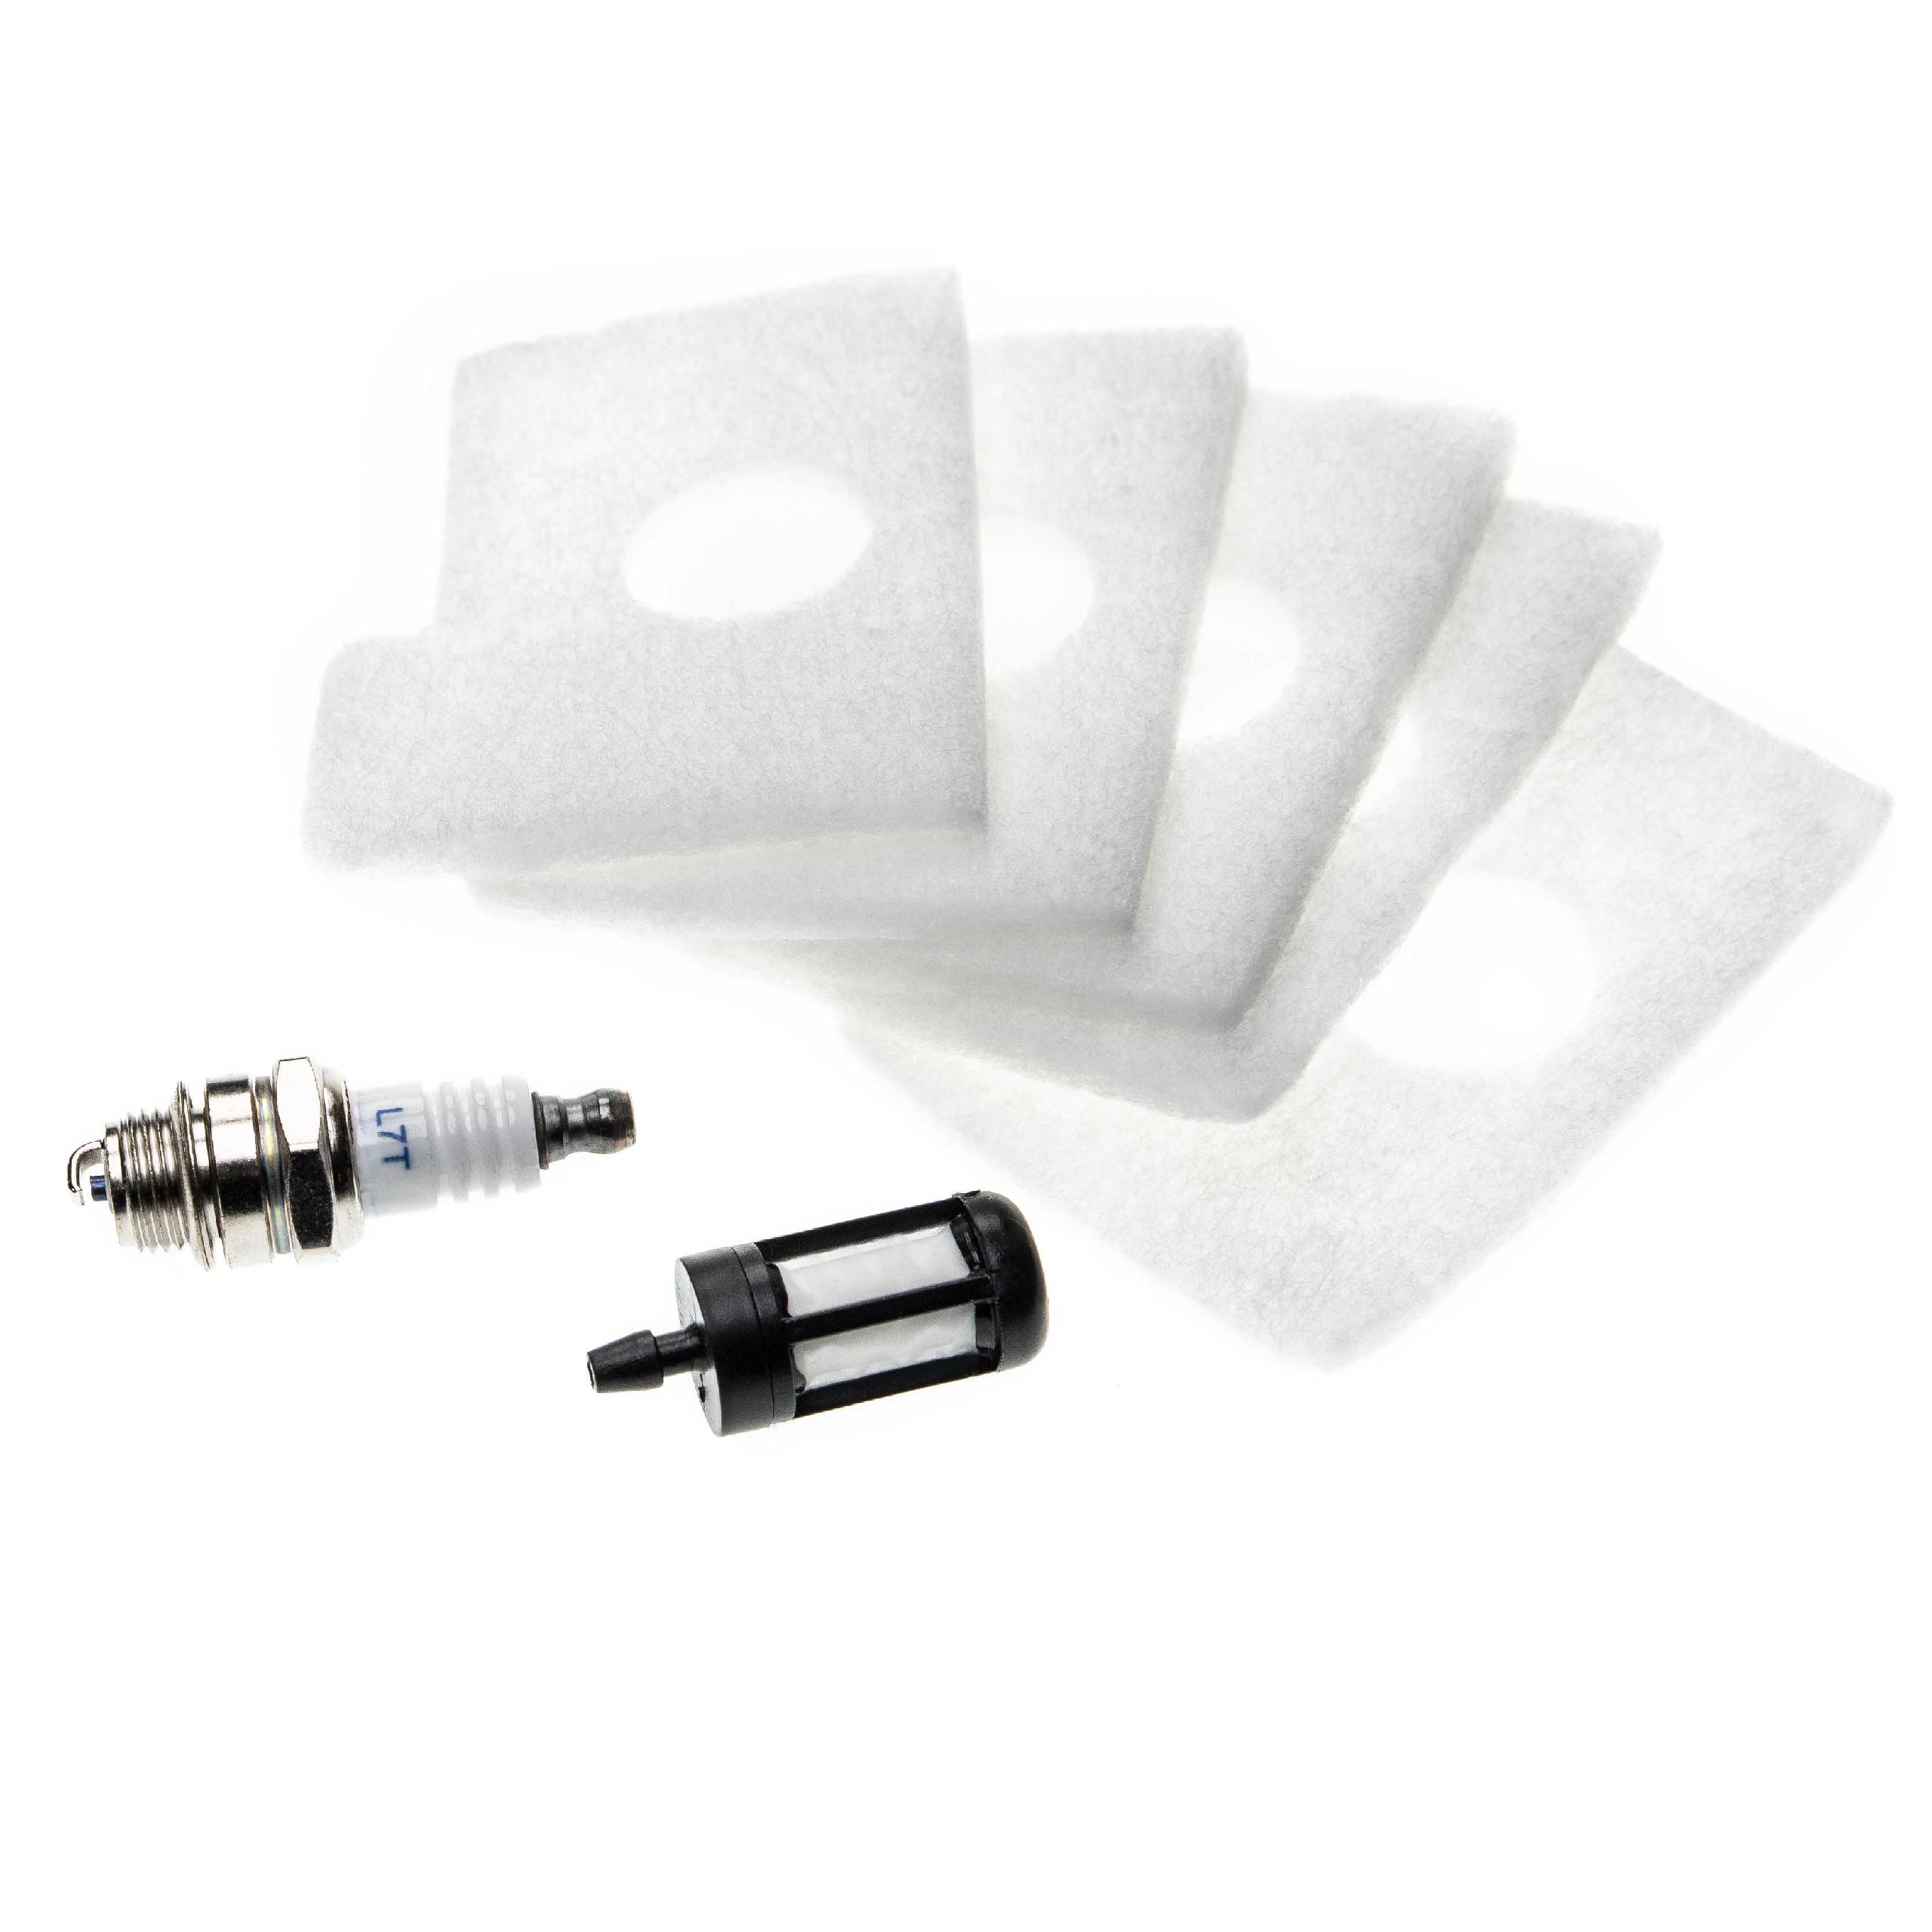 Repair Kit as Replacement for Stihl Chainsaw 0000-350-3500- 5x air filter, 1x inline gas filter, 1x spark plug